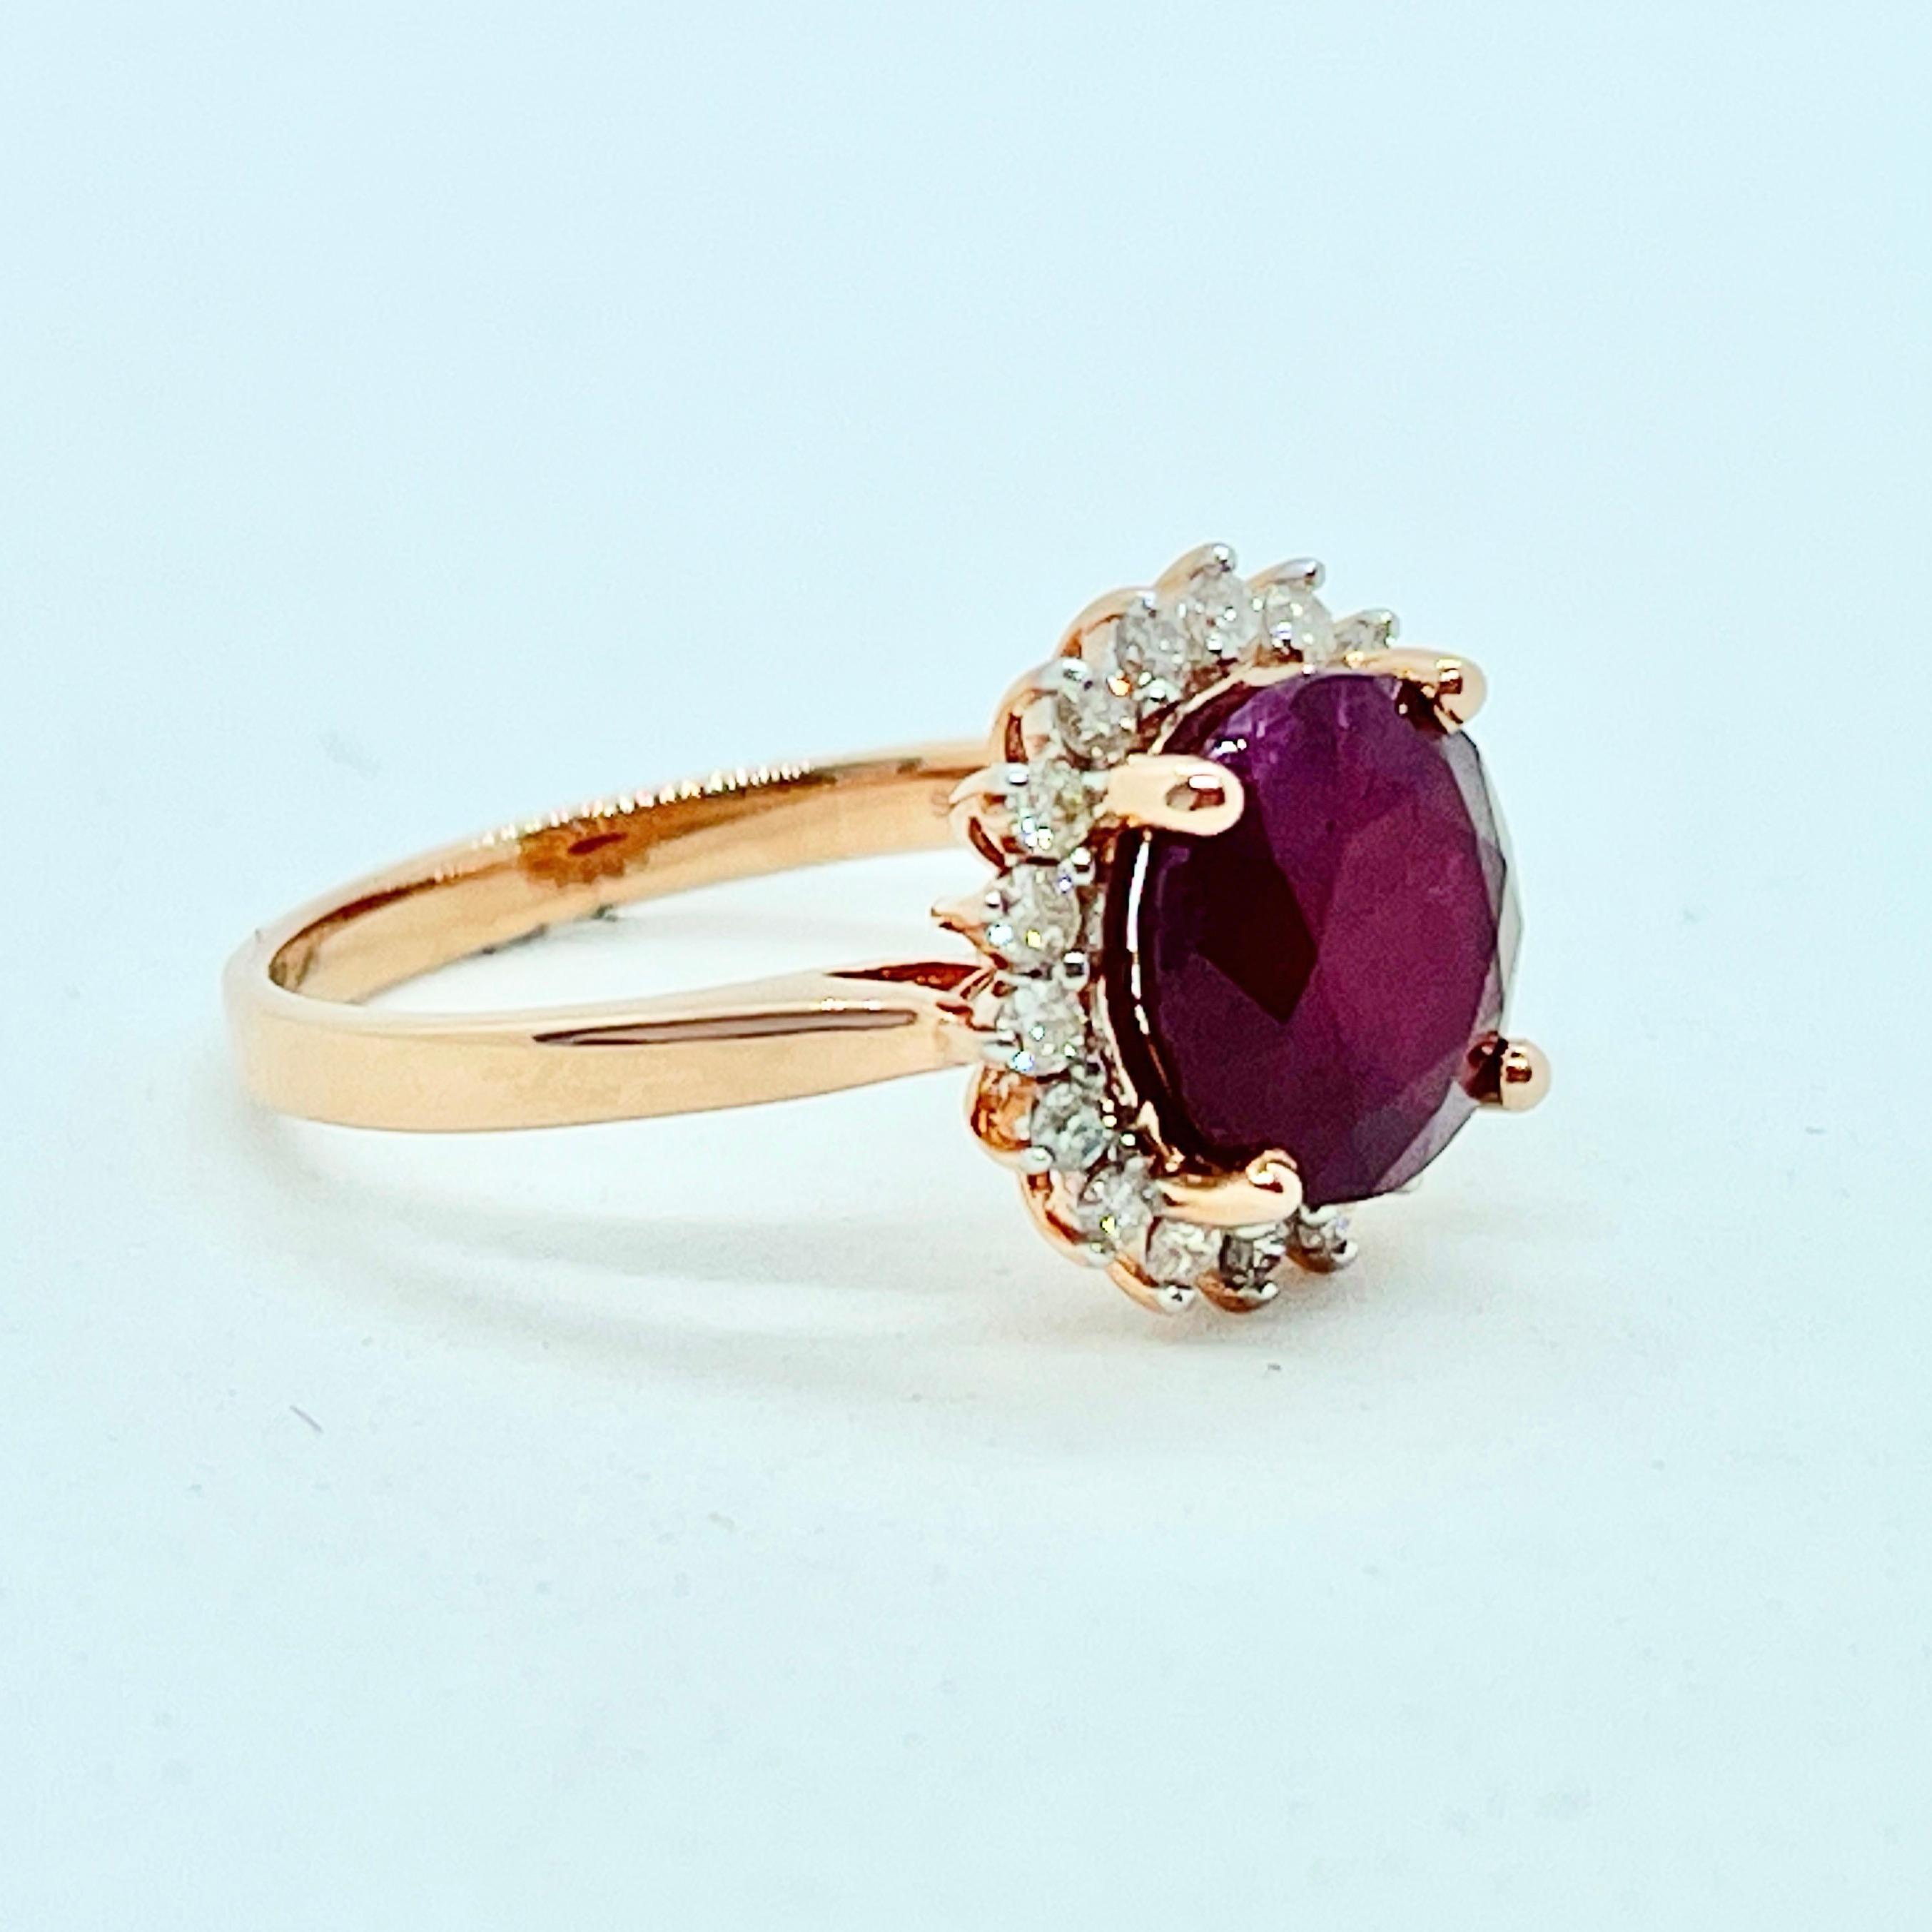 A Stunning Piece … Just look at the Colour!

This ring features a Natural Ruby surrounded with a halo of sparkly Diamonds.

The Ruby weighs approx 3.37ct with strong purplish/red colour and is set in 14ct rose gold. It has some small, silk